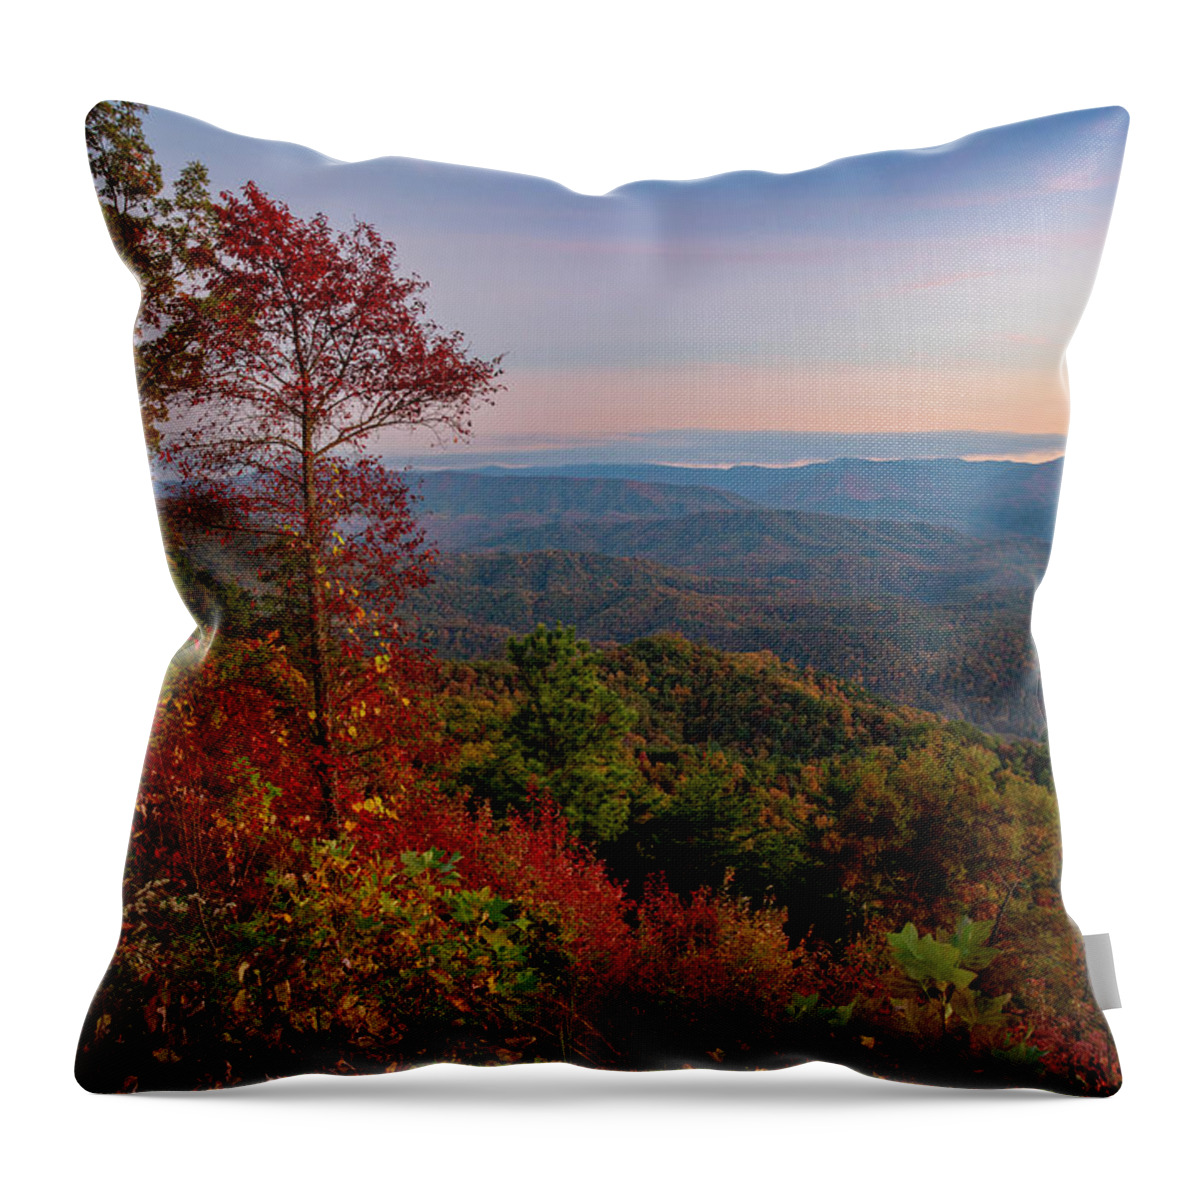 Blue Ridge Parkway Fall Sunset Throw Pillow featuring the photograph Blue Ridge Parkway Fall Sunset by Dan Sproul